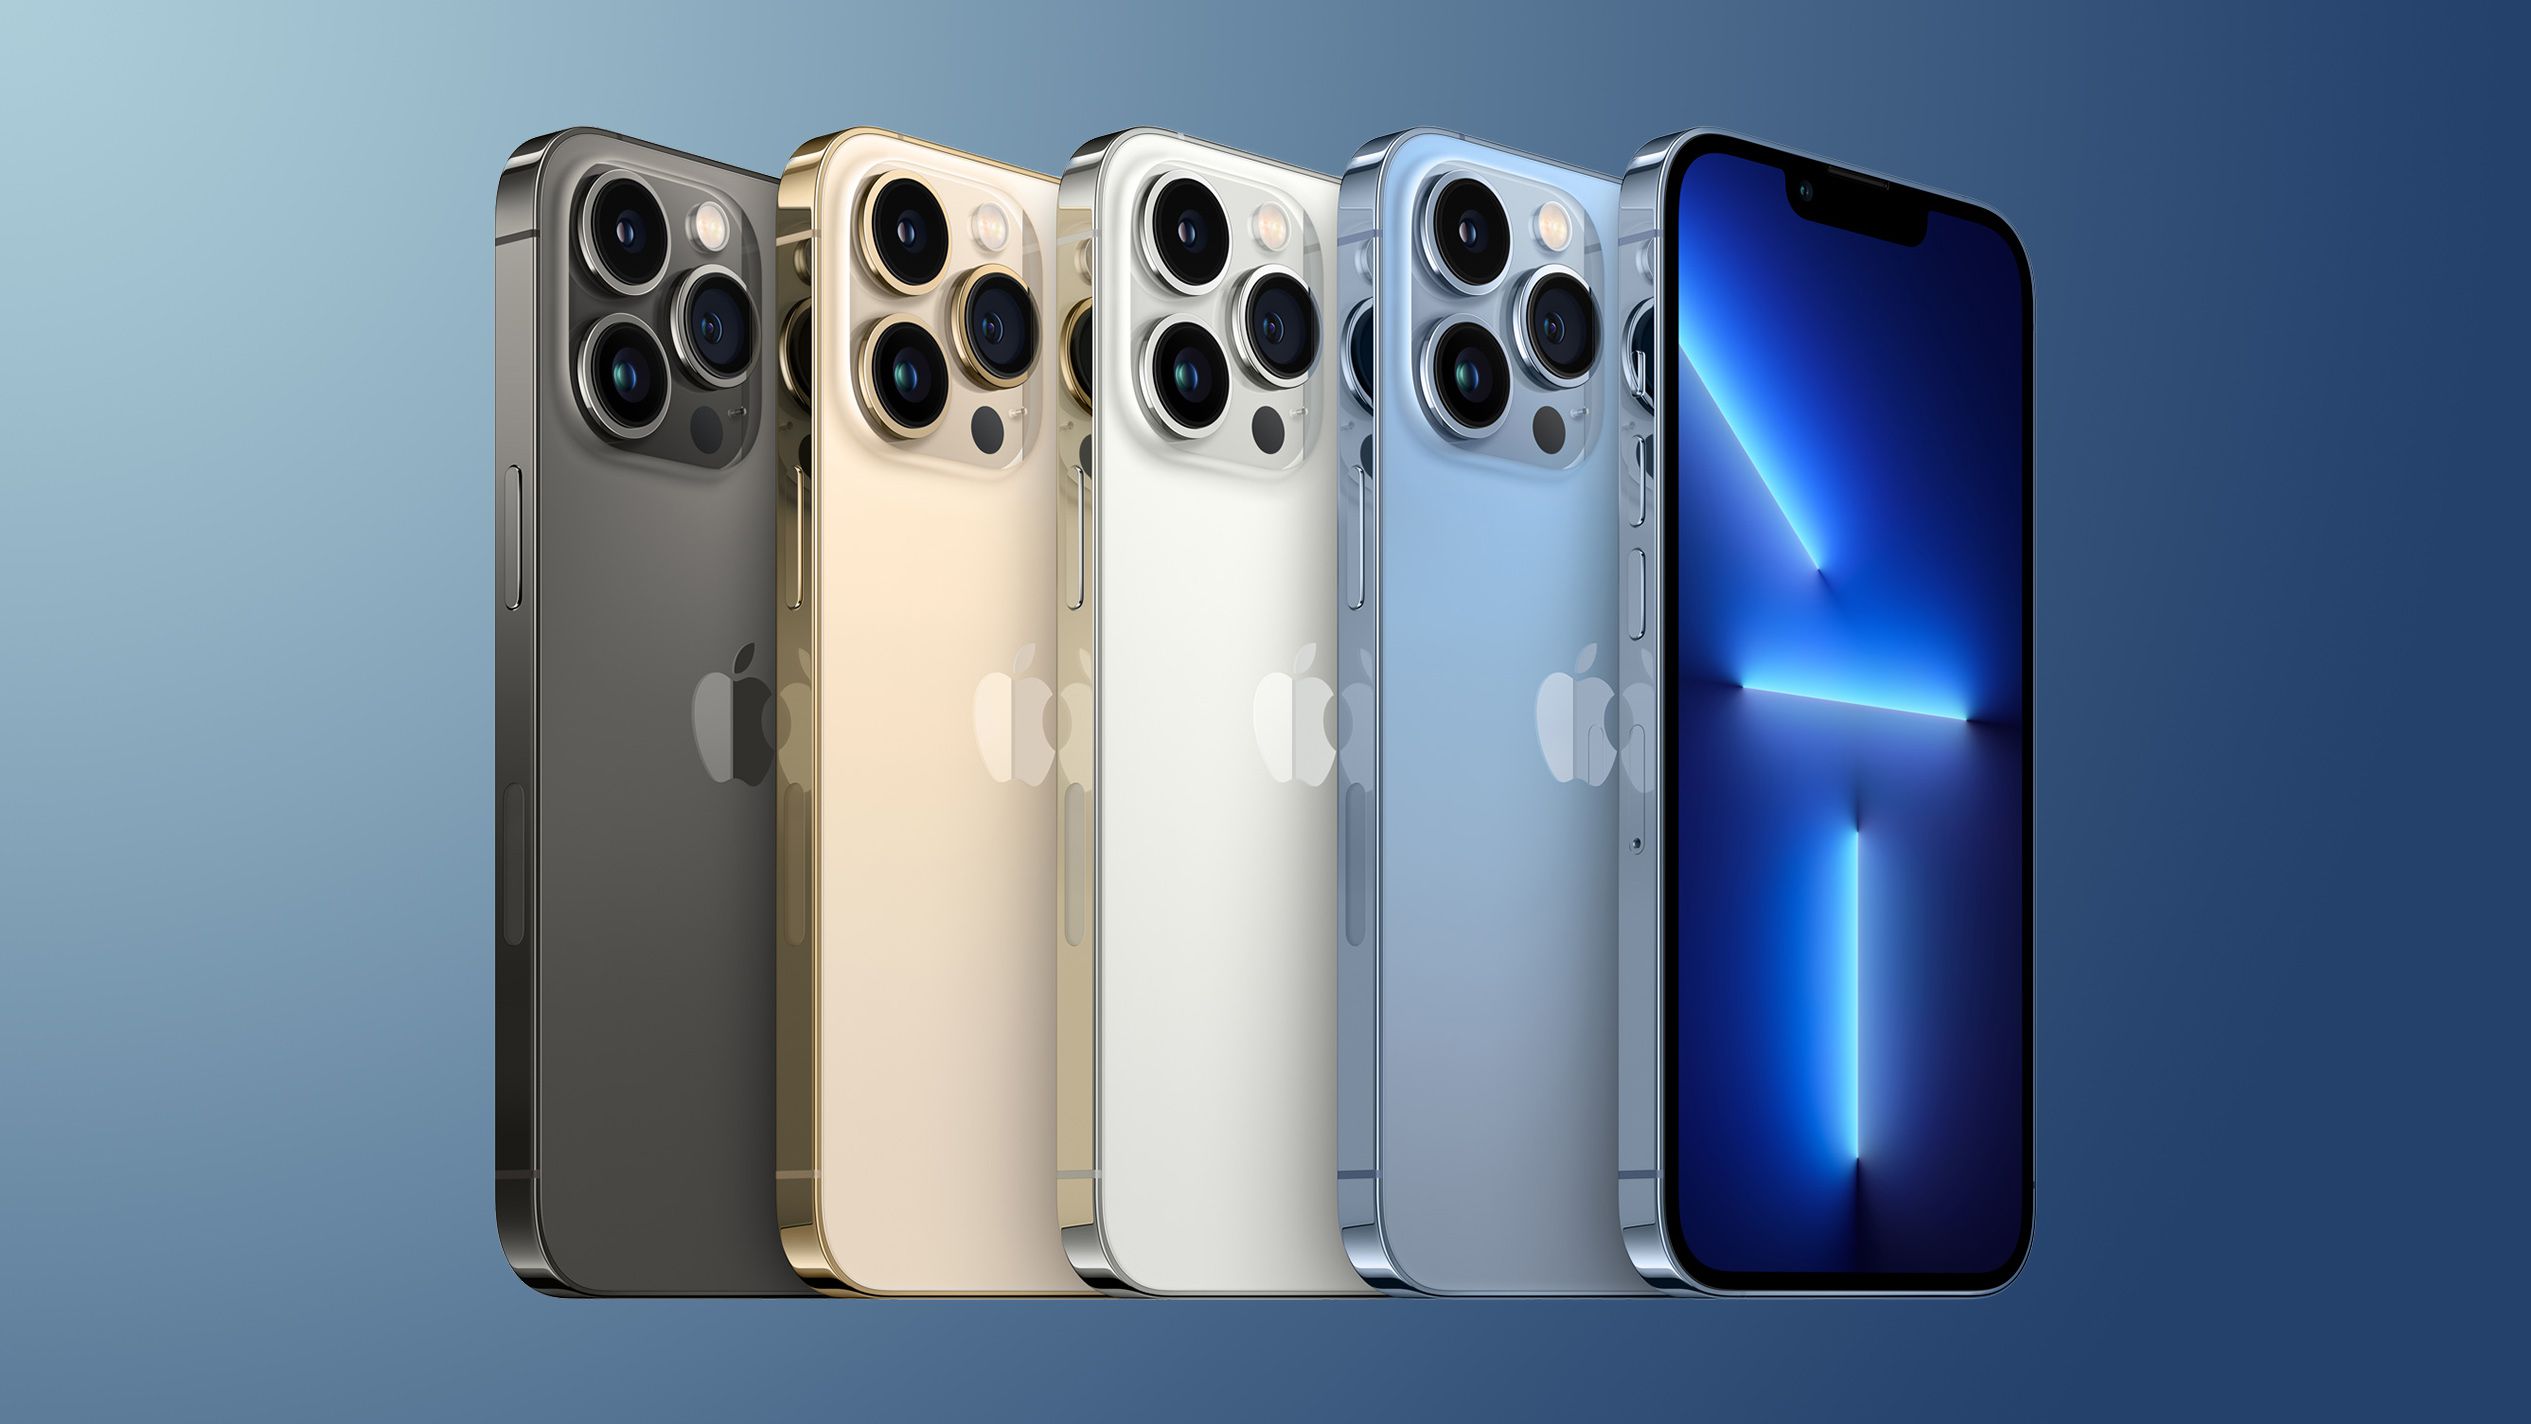 iPhone 13 Pro Pre-Orders Off to Promising Start With Strong Early Demand, Says Analyst